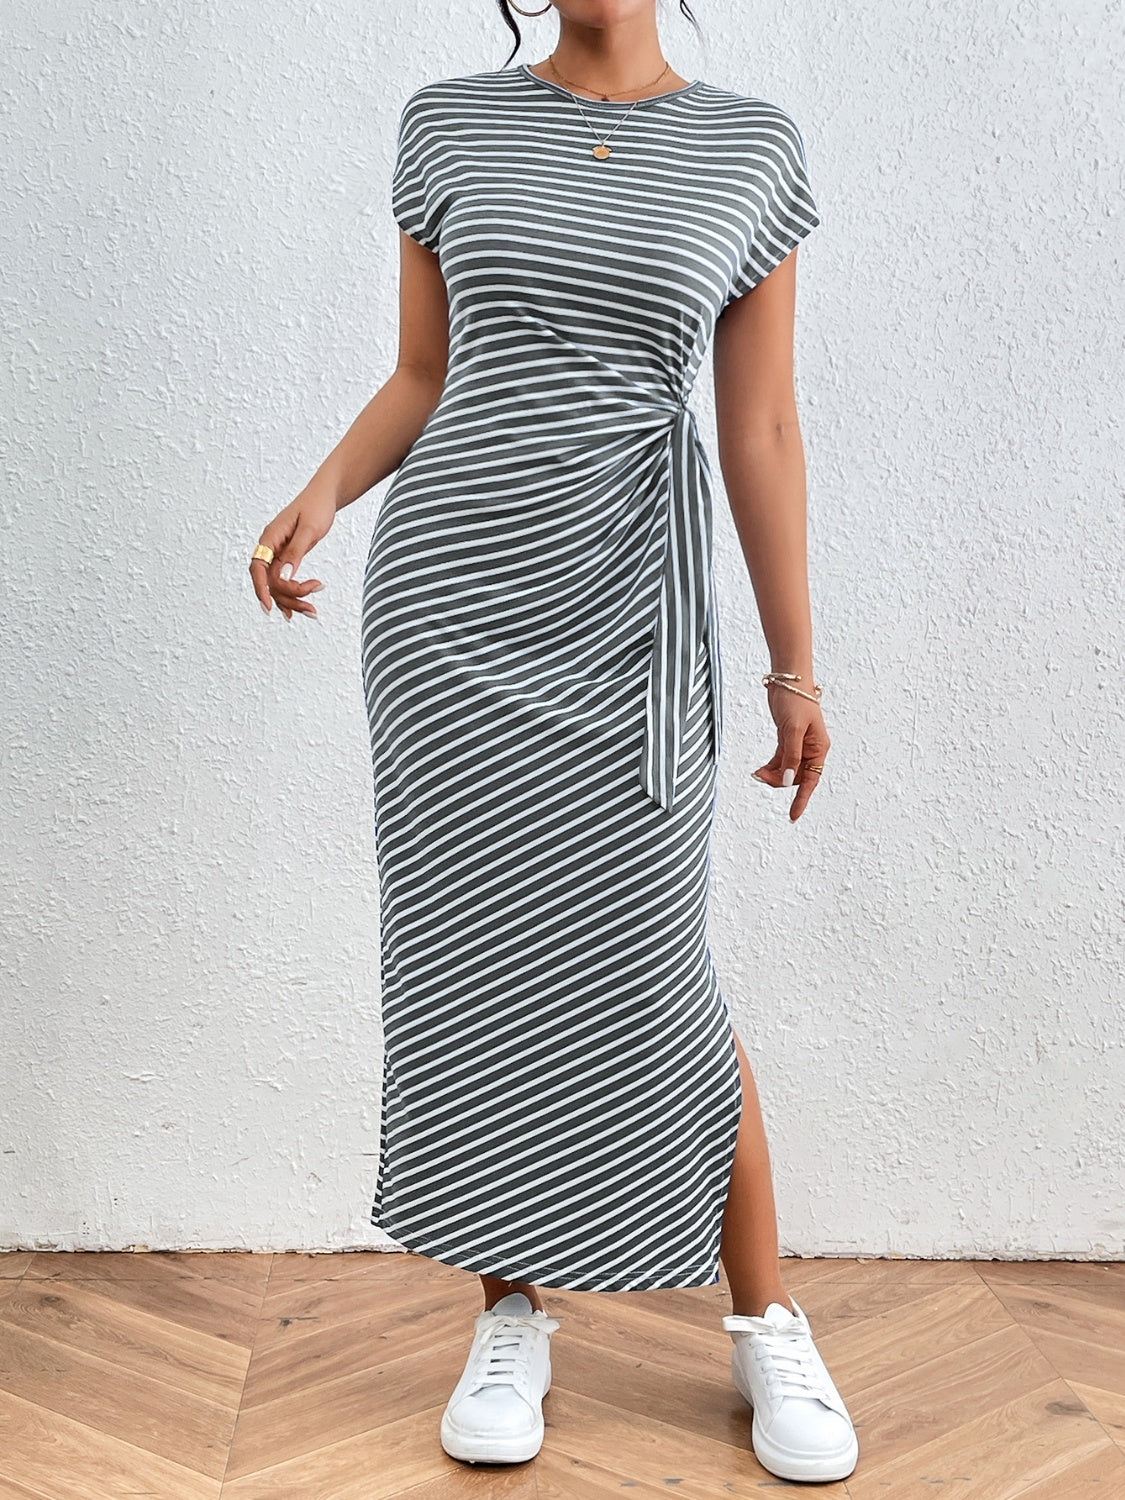 Tied Striped Round Neck Short Sleeve Tee Dress - Tophatter Deals